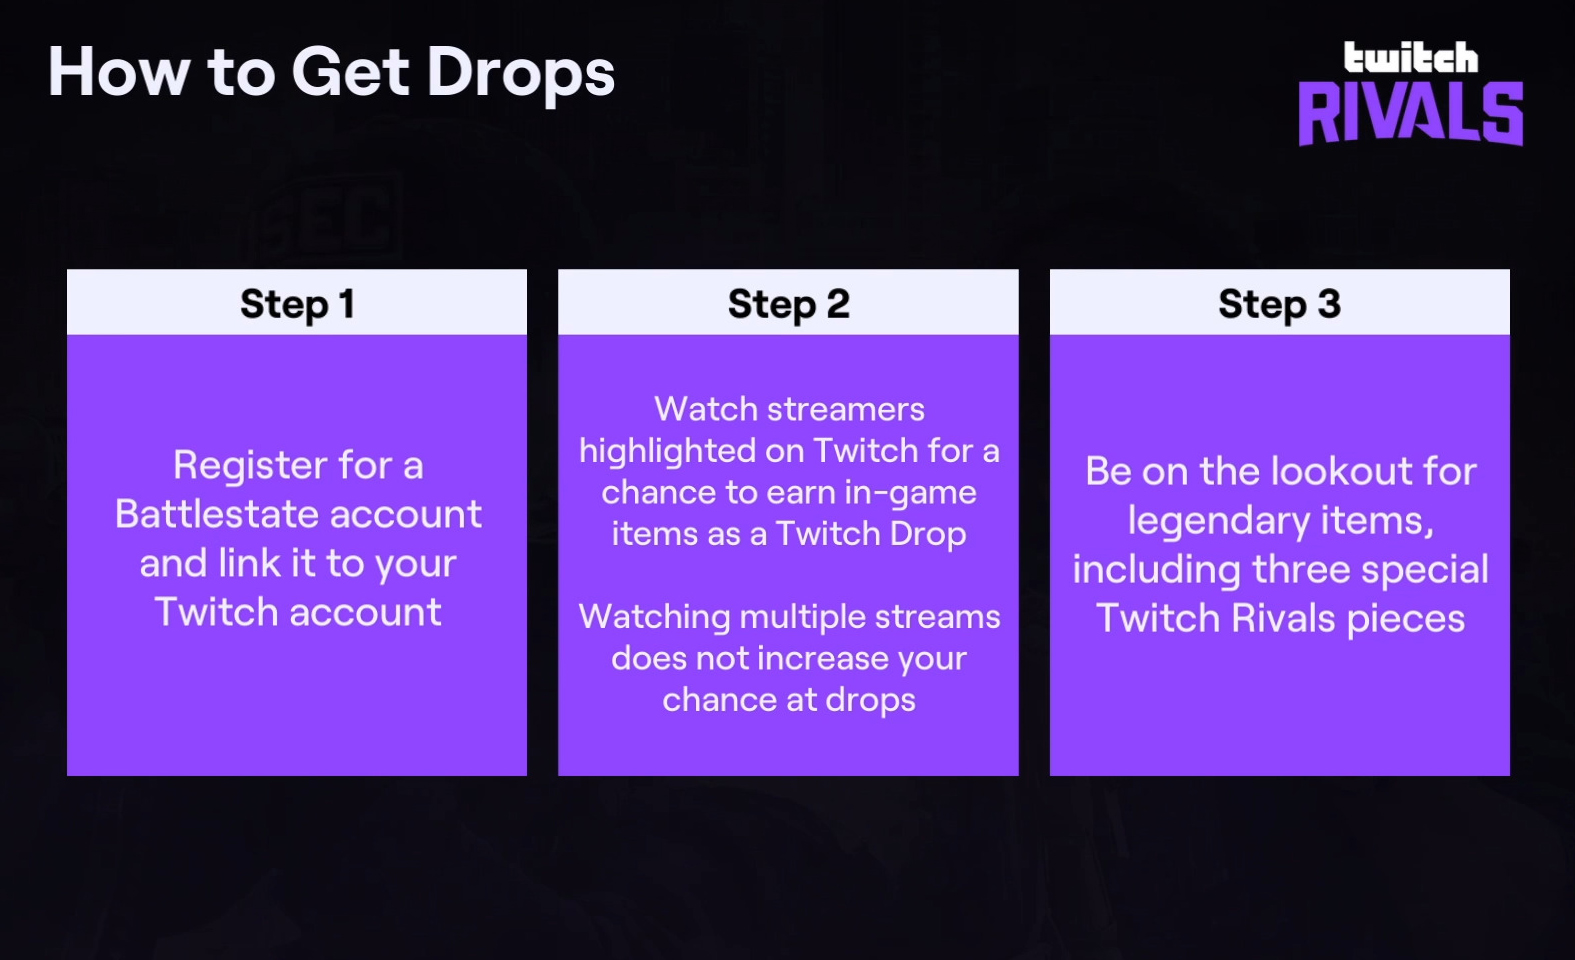 How to Earn Drops